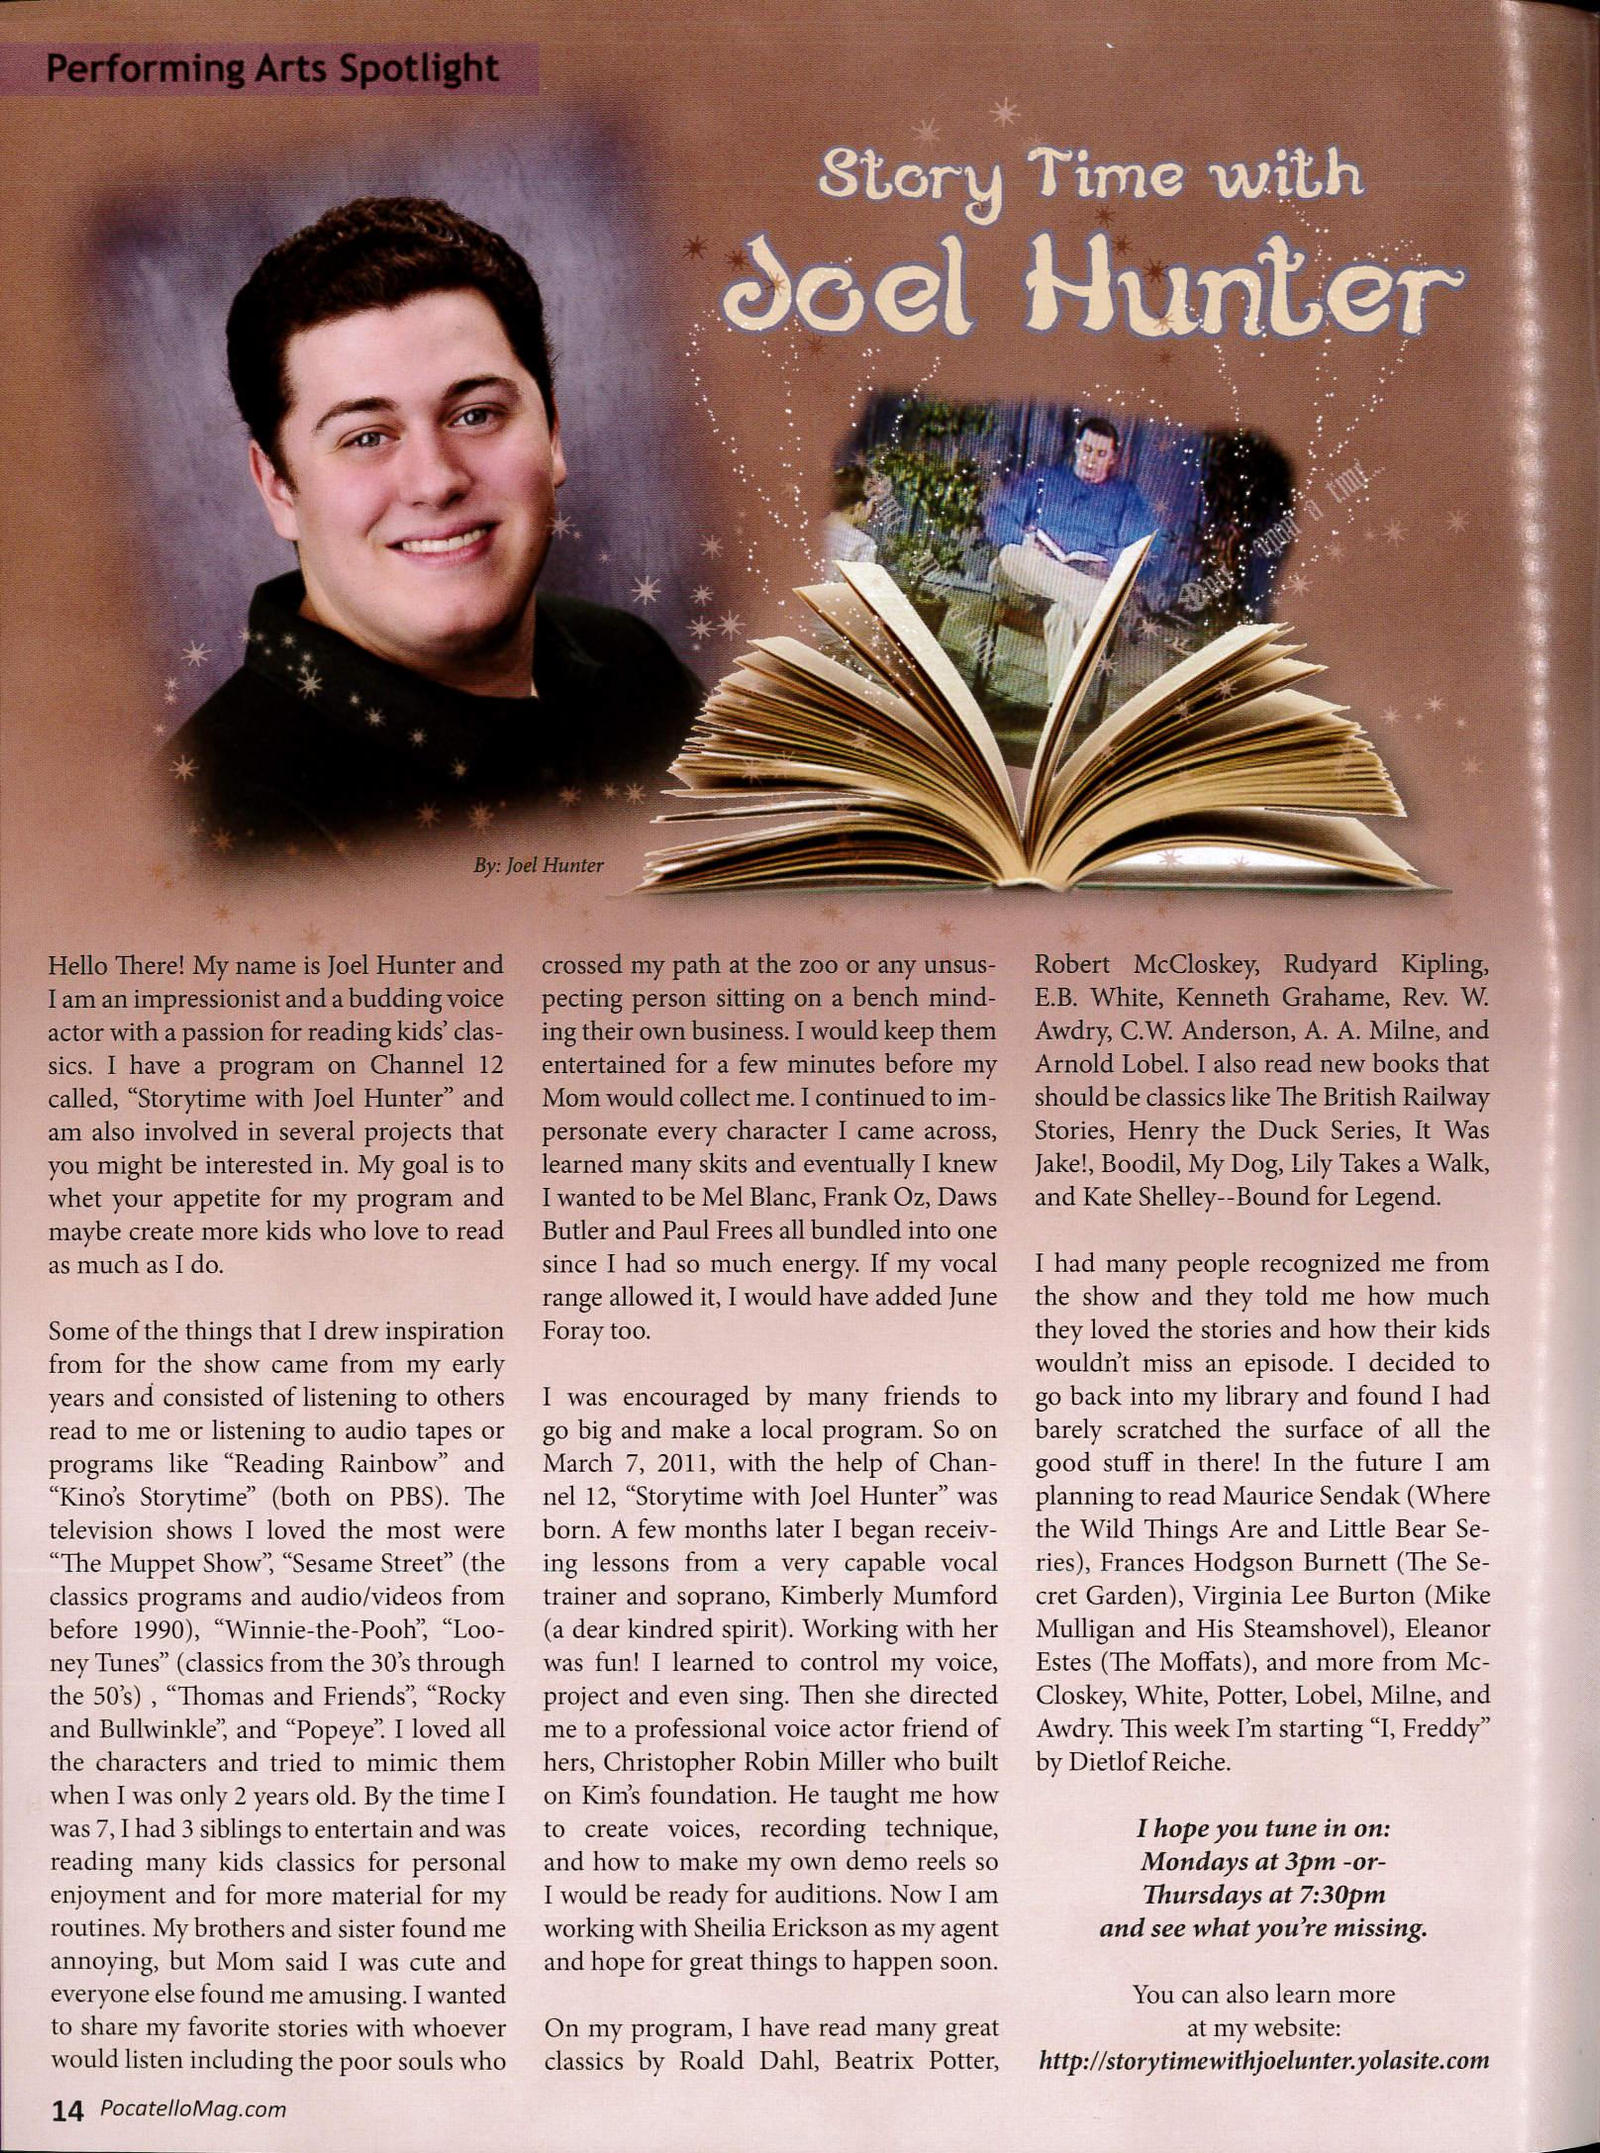 Storytime with Joel Hunter Article